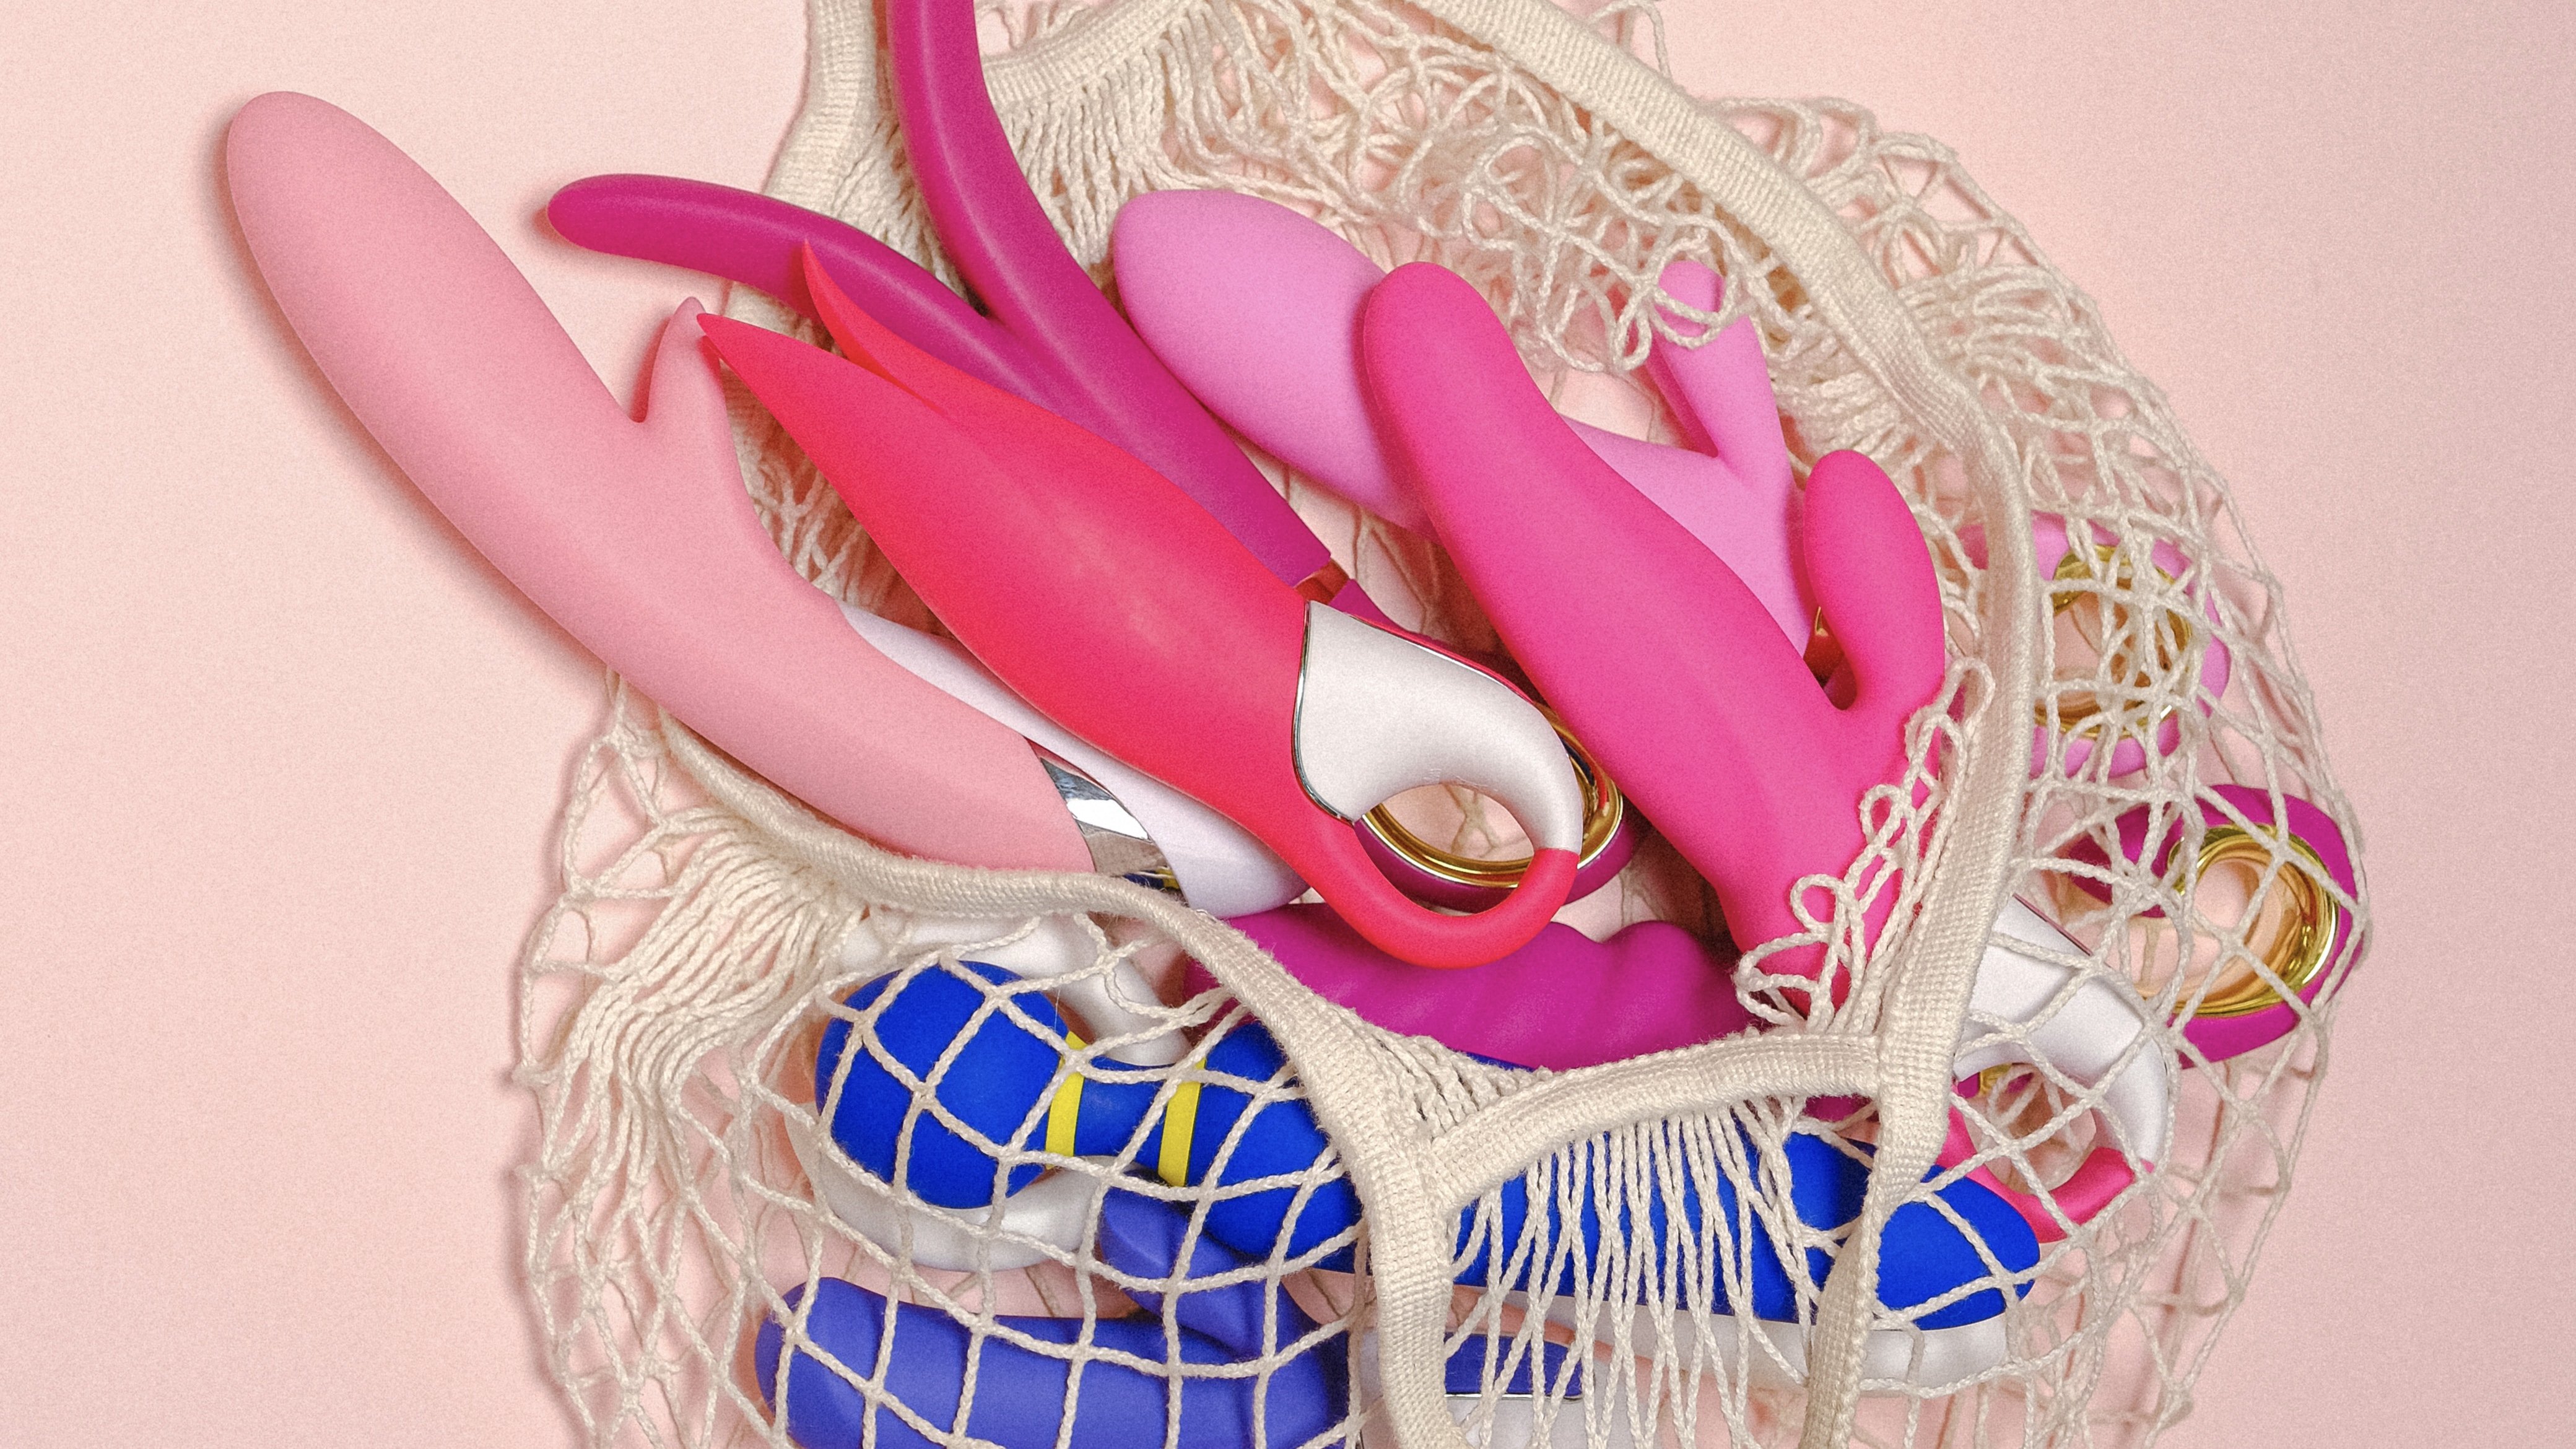 bag full of sex toys on a pink background